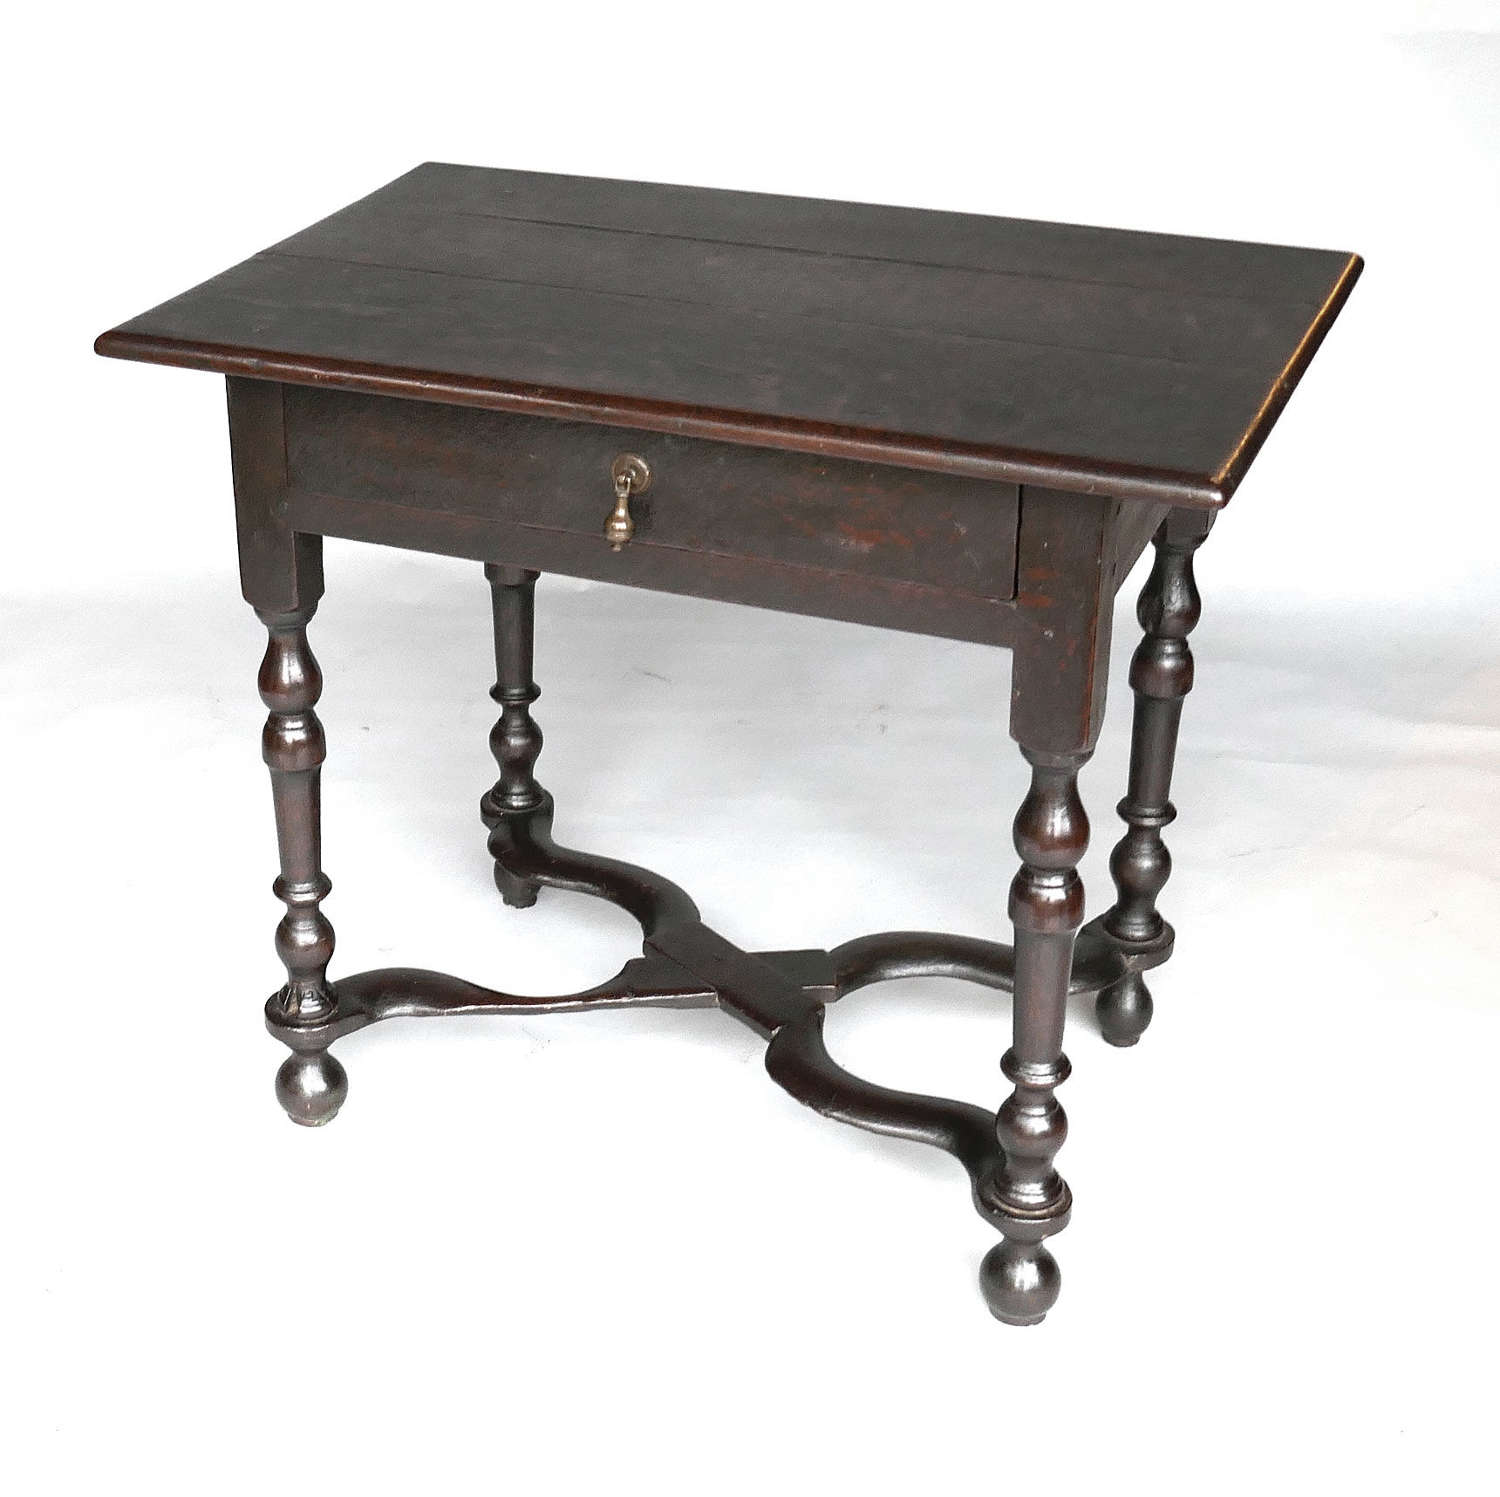 Antique Oak & Country Furniture 17thc X Stretcher Side Table. English